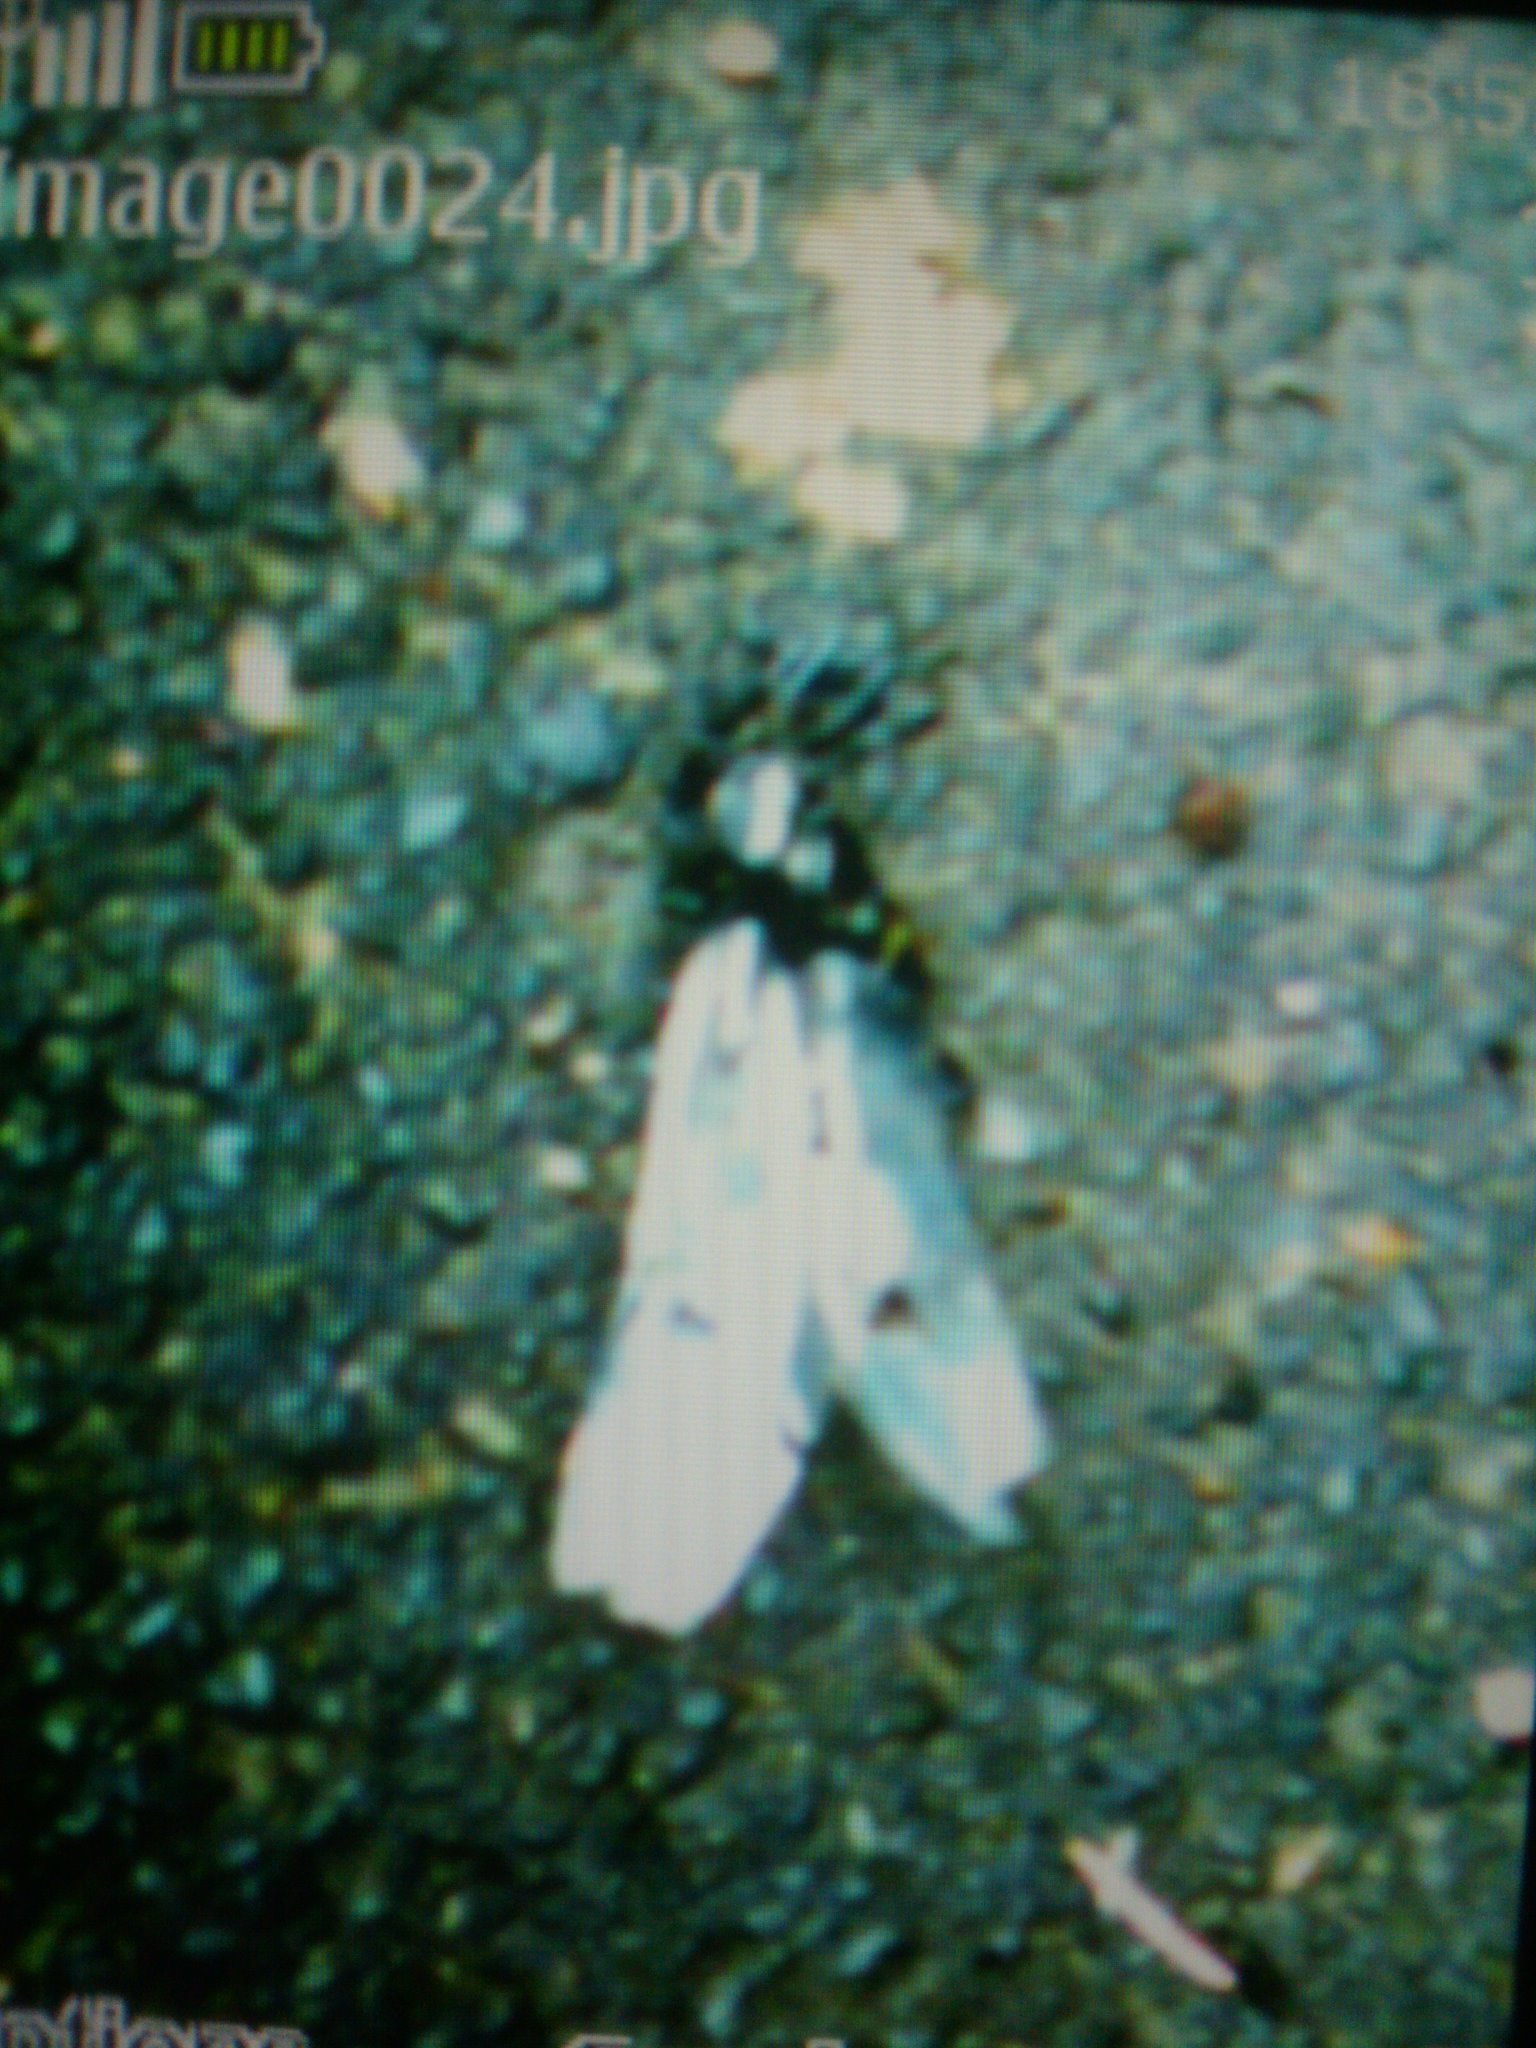 Unidentified insect